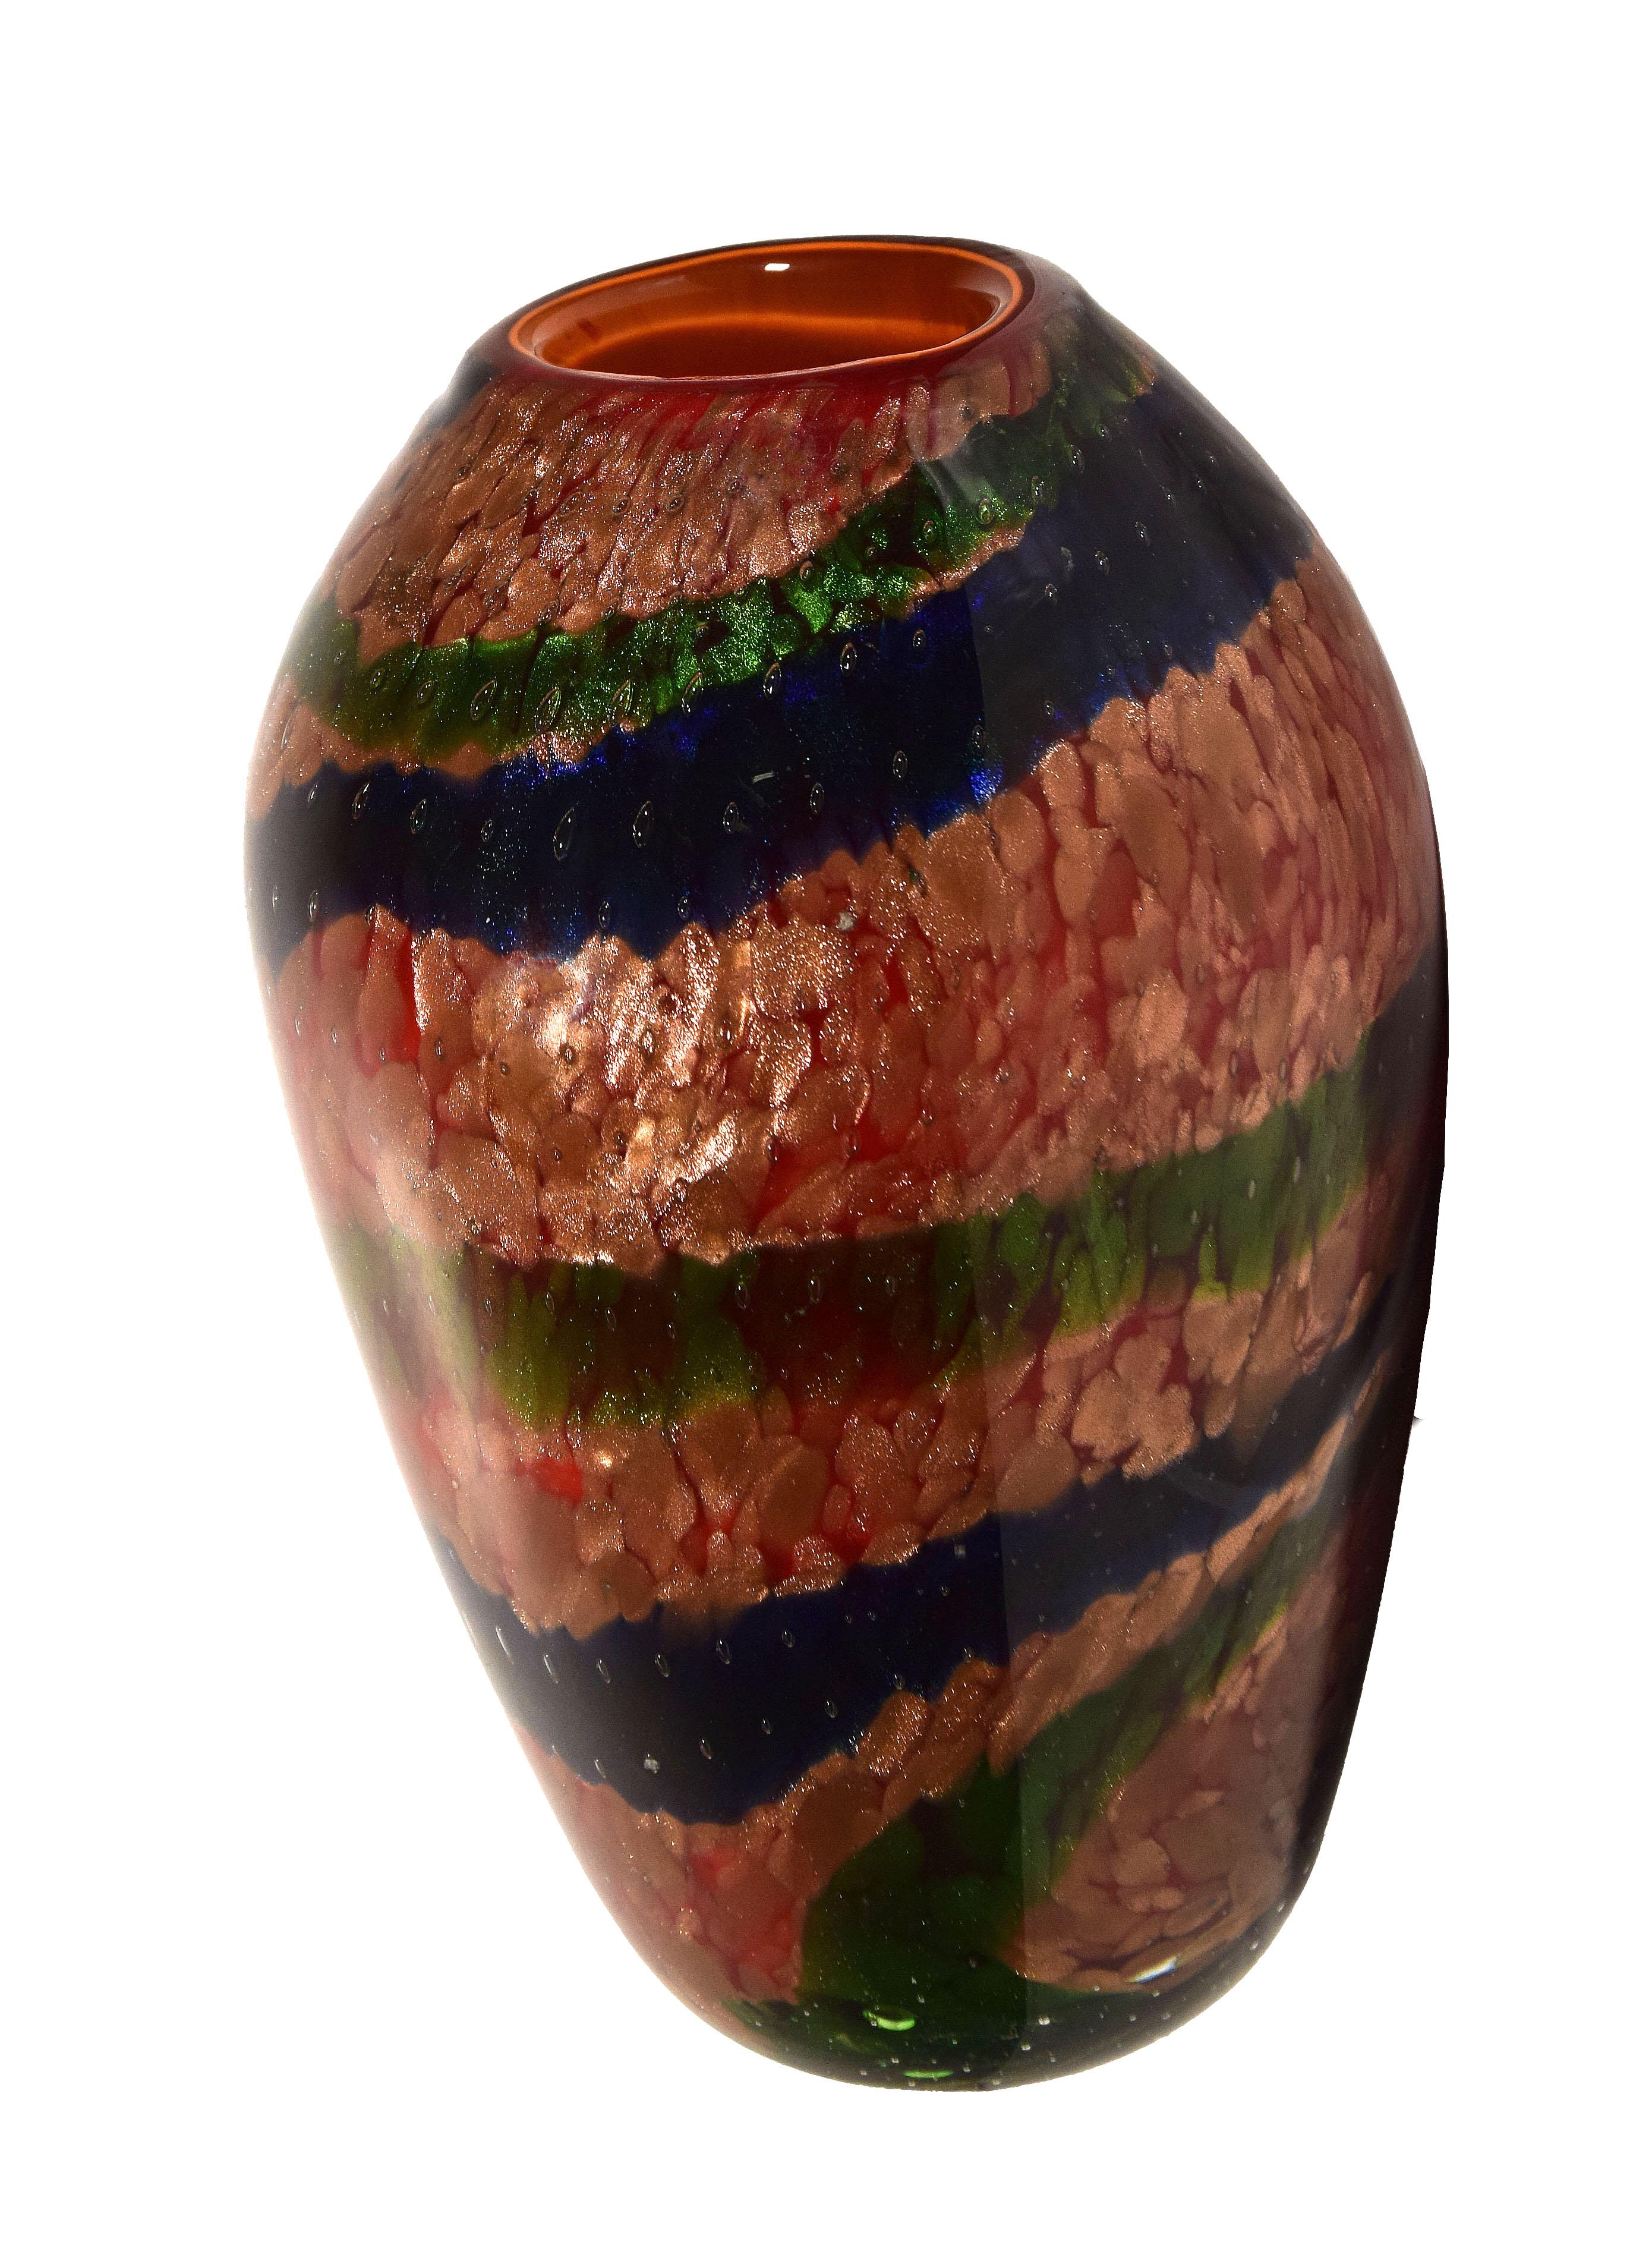 You are admiring an Aventurine vase, a precious decorative object manufactured very likely by Aureliano Toso in the 1960s.

Beautiful transparent vase in aventurine, layered in red and decorated with green and blue bands. 

Dimensions: cm 14 x